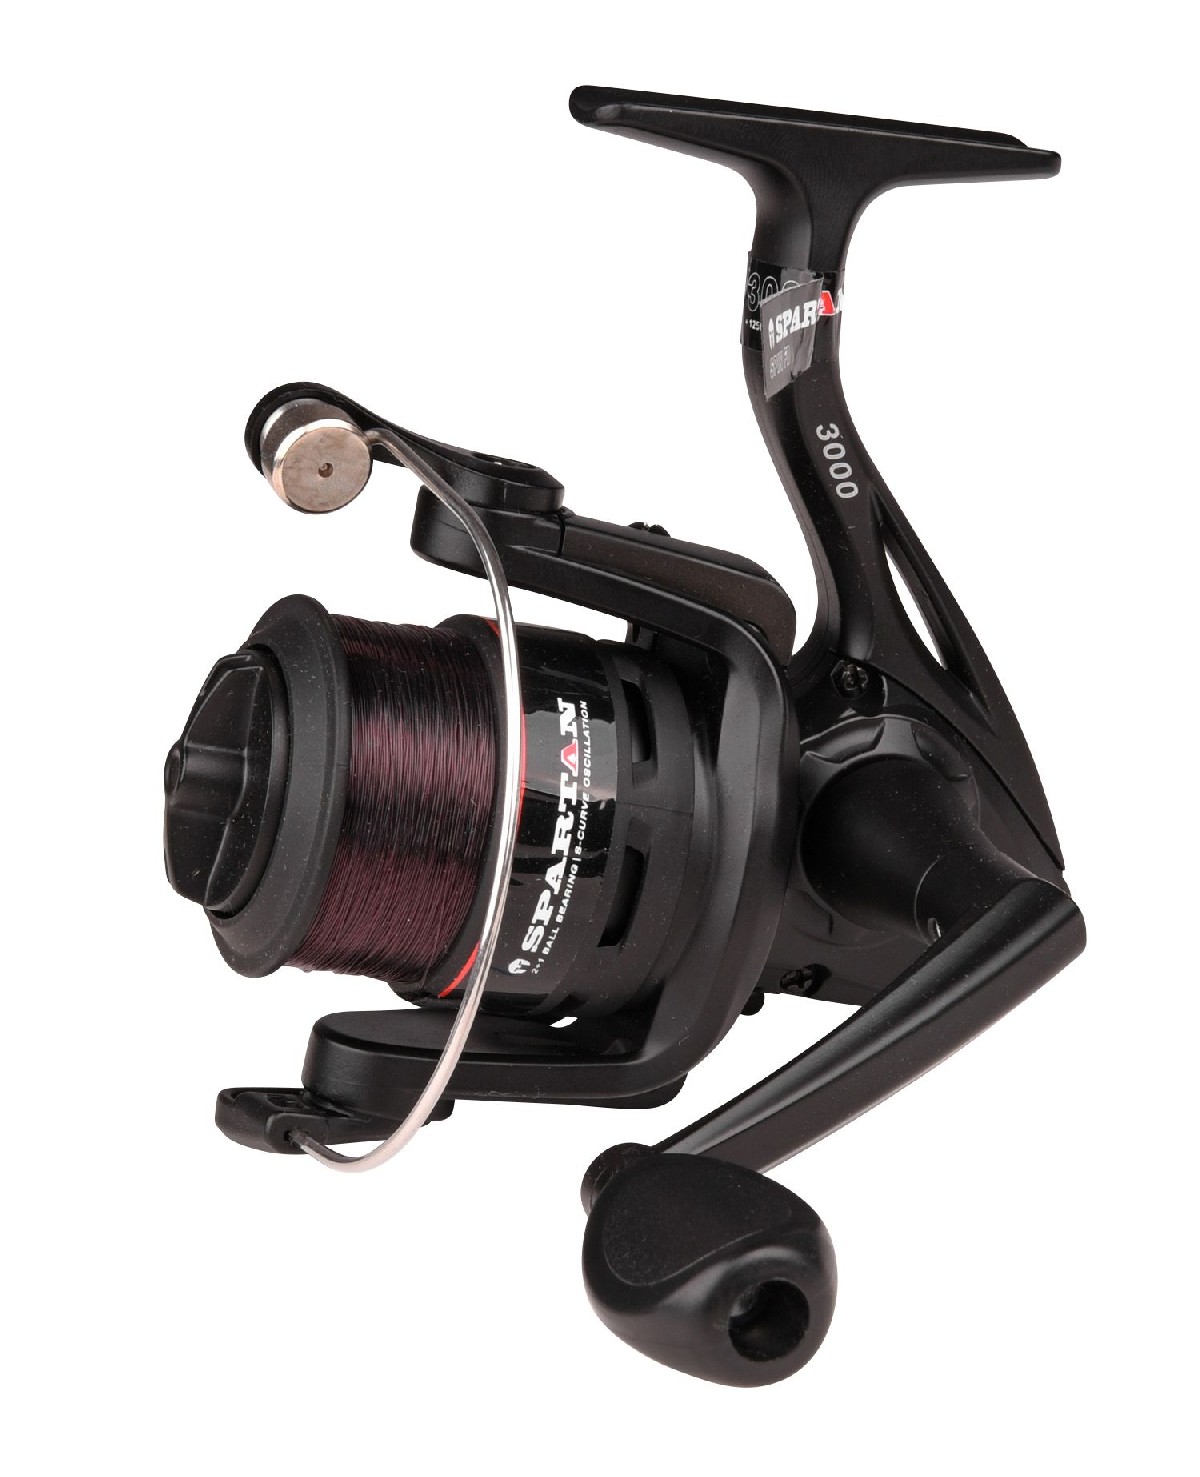 Spro Spartan Reel 2000 Spooled With 0,23 mm Mono